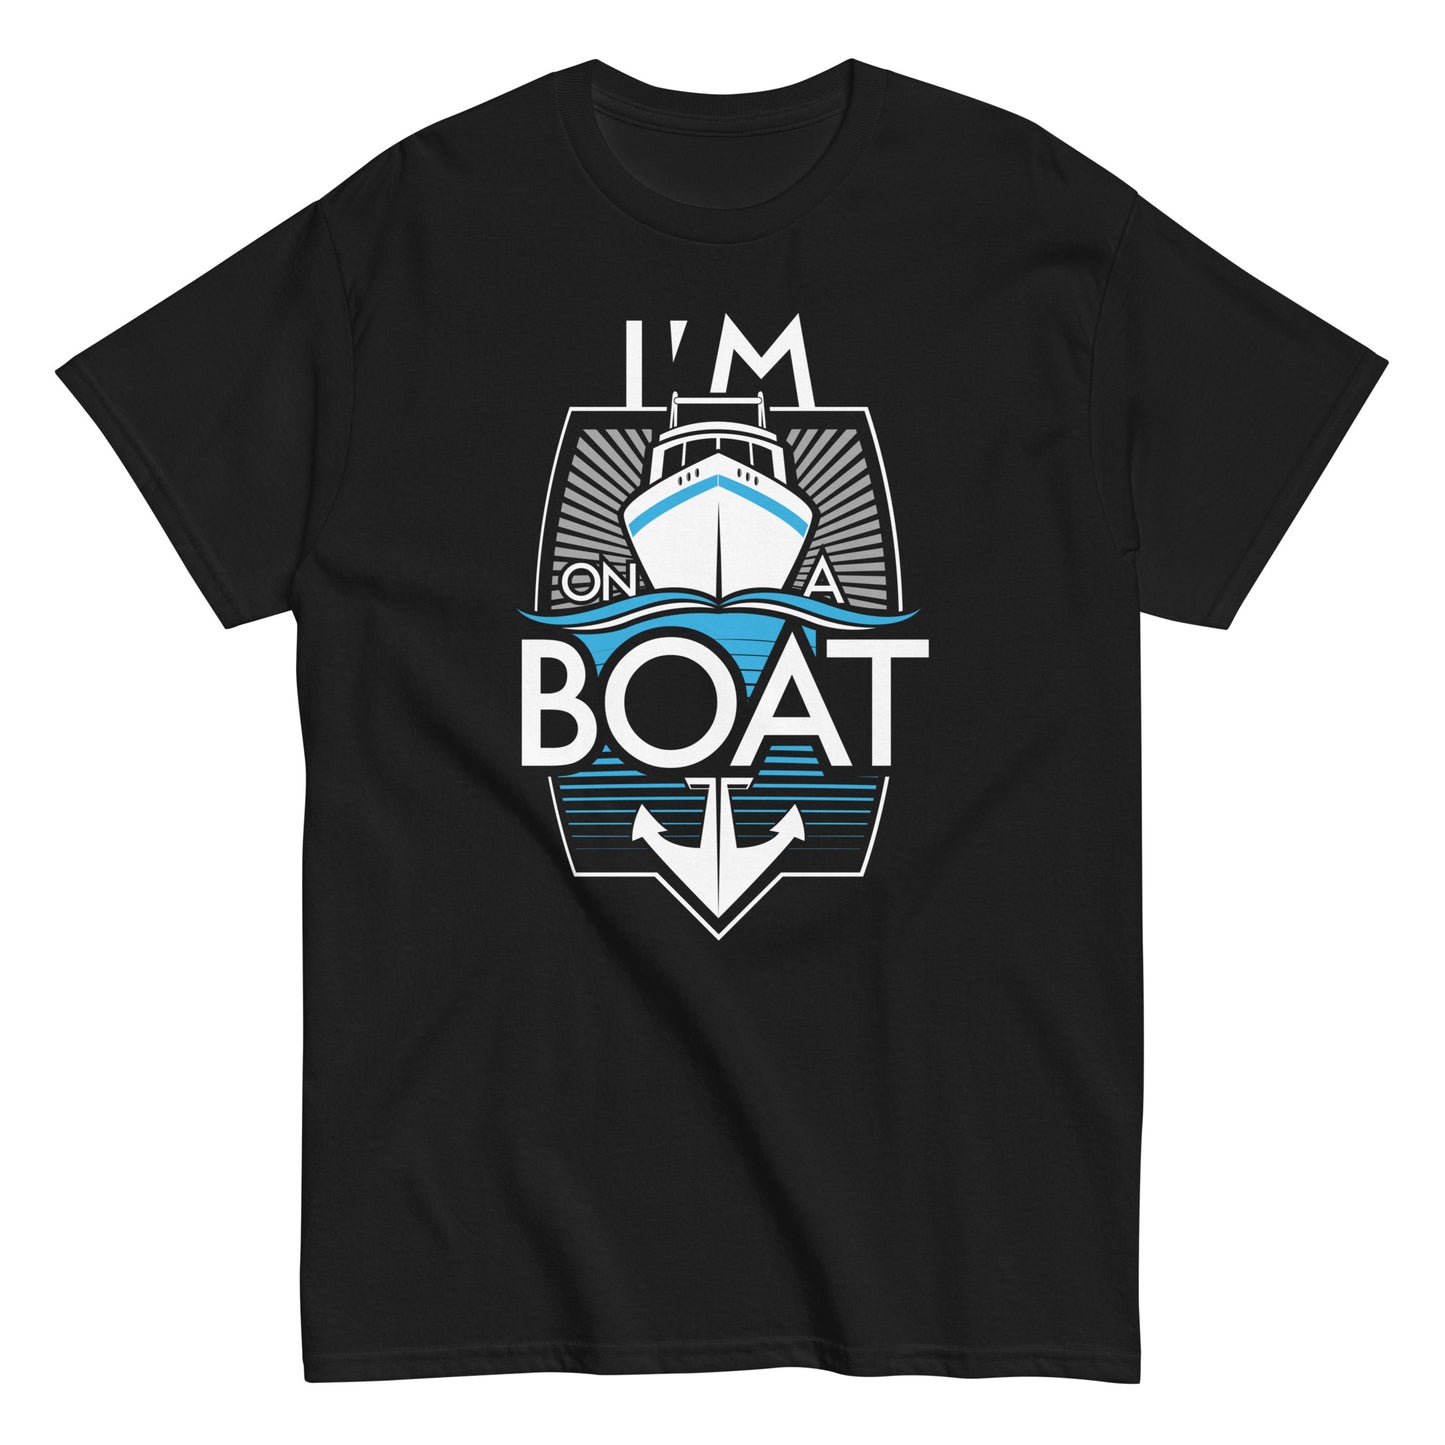 I'm On A Boat Men's Classic Tee